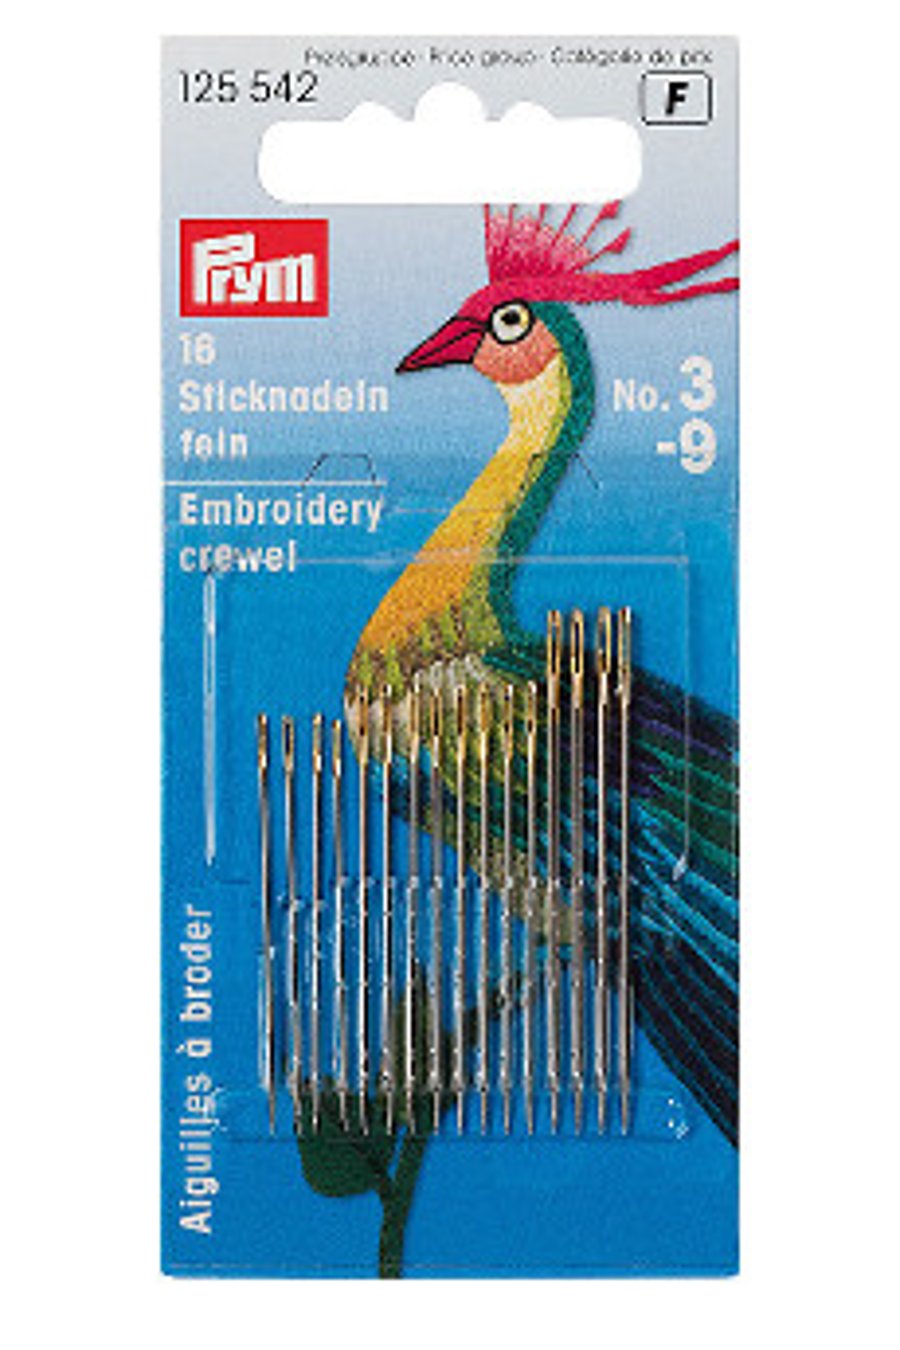 Prym Hand Embroidery Crewel with Gold Eye